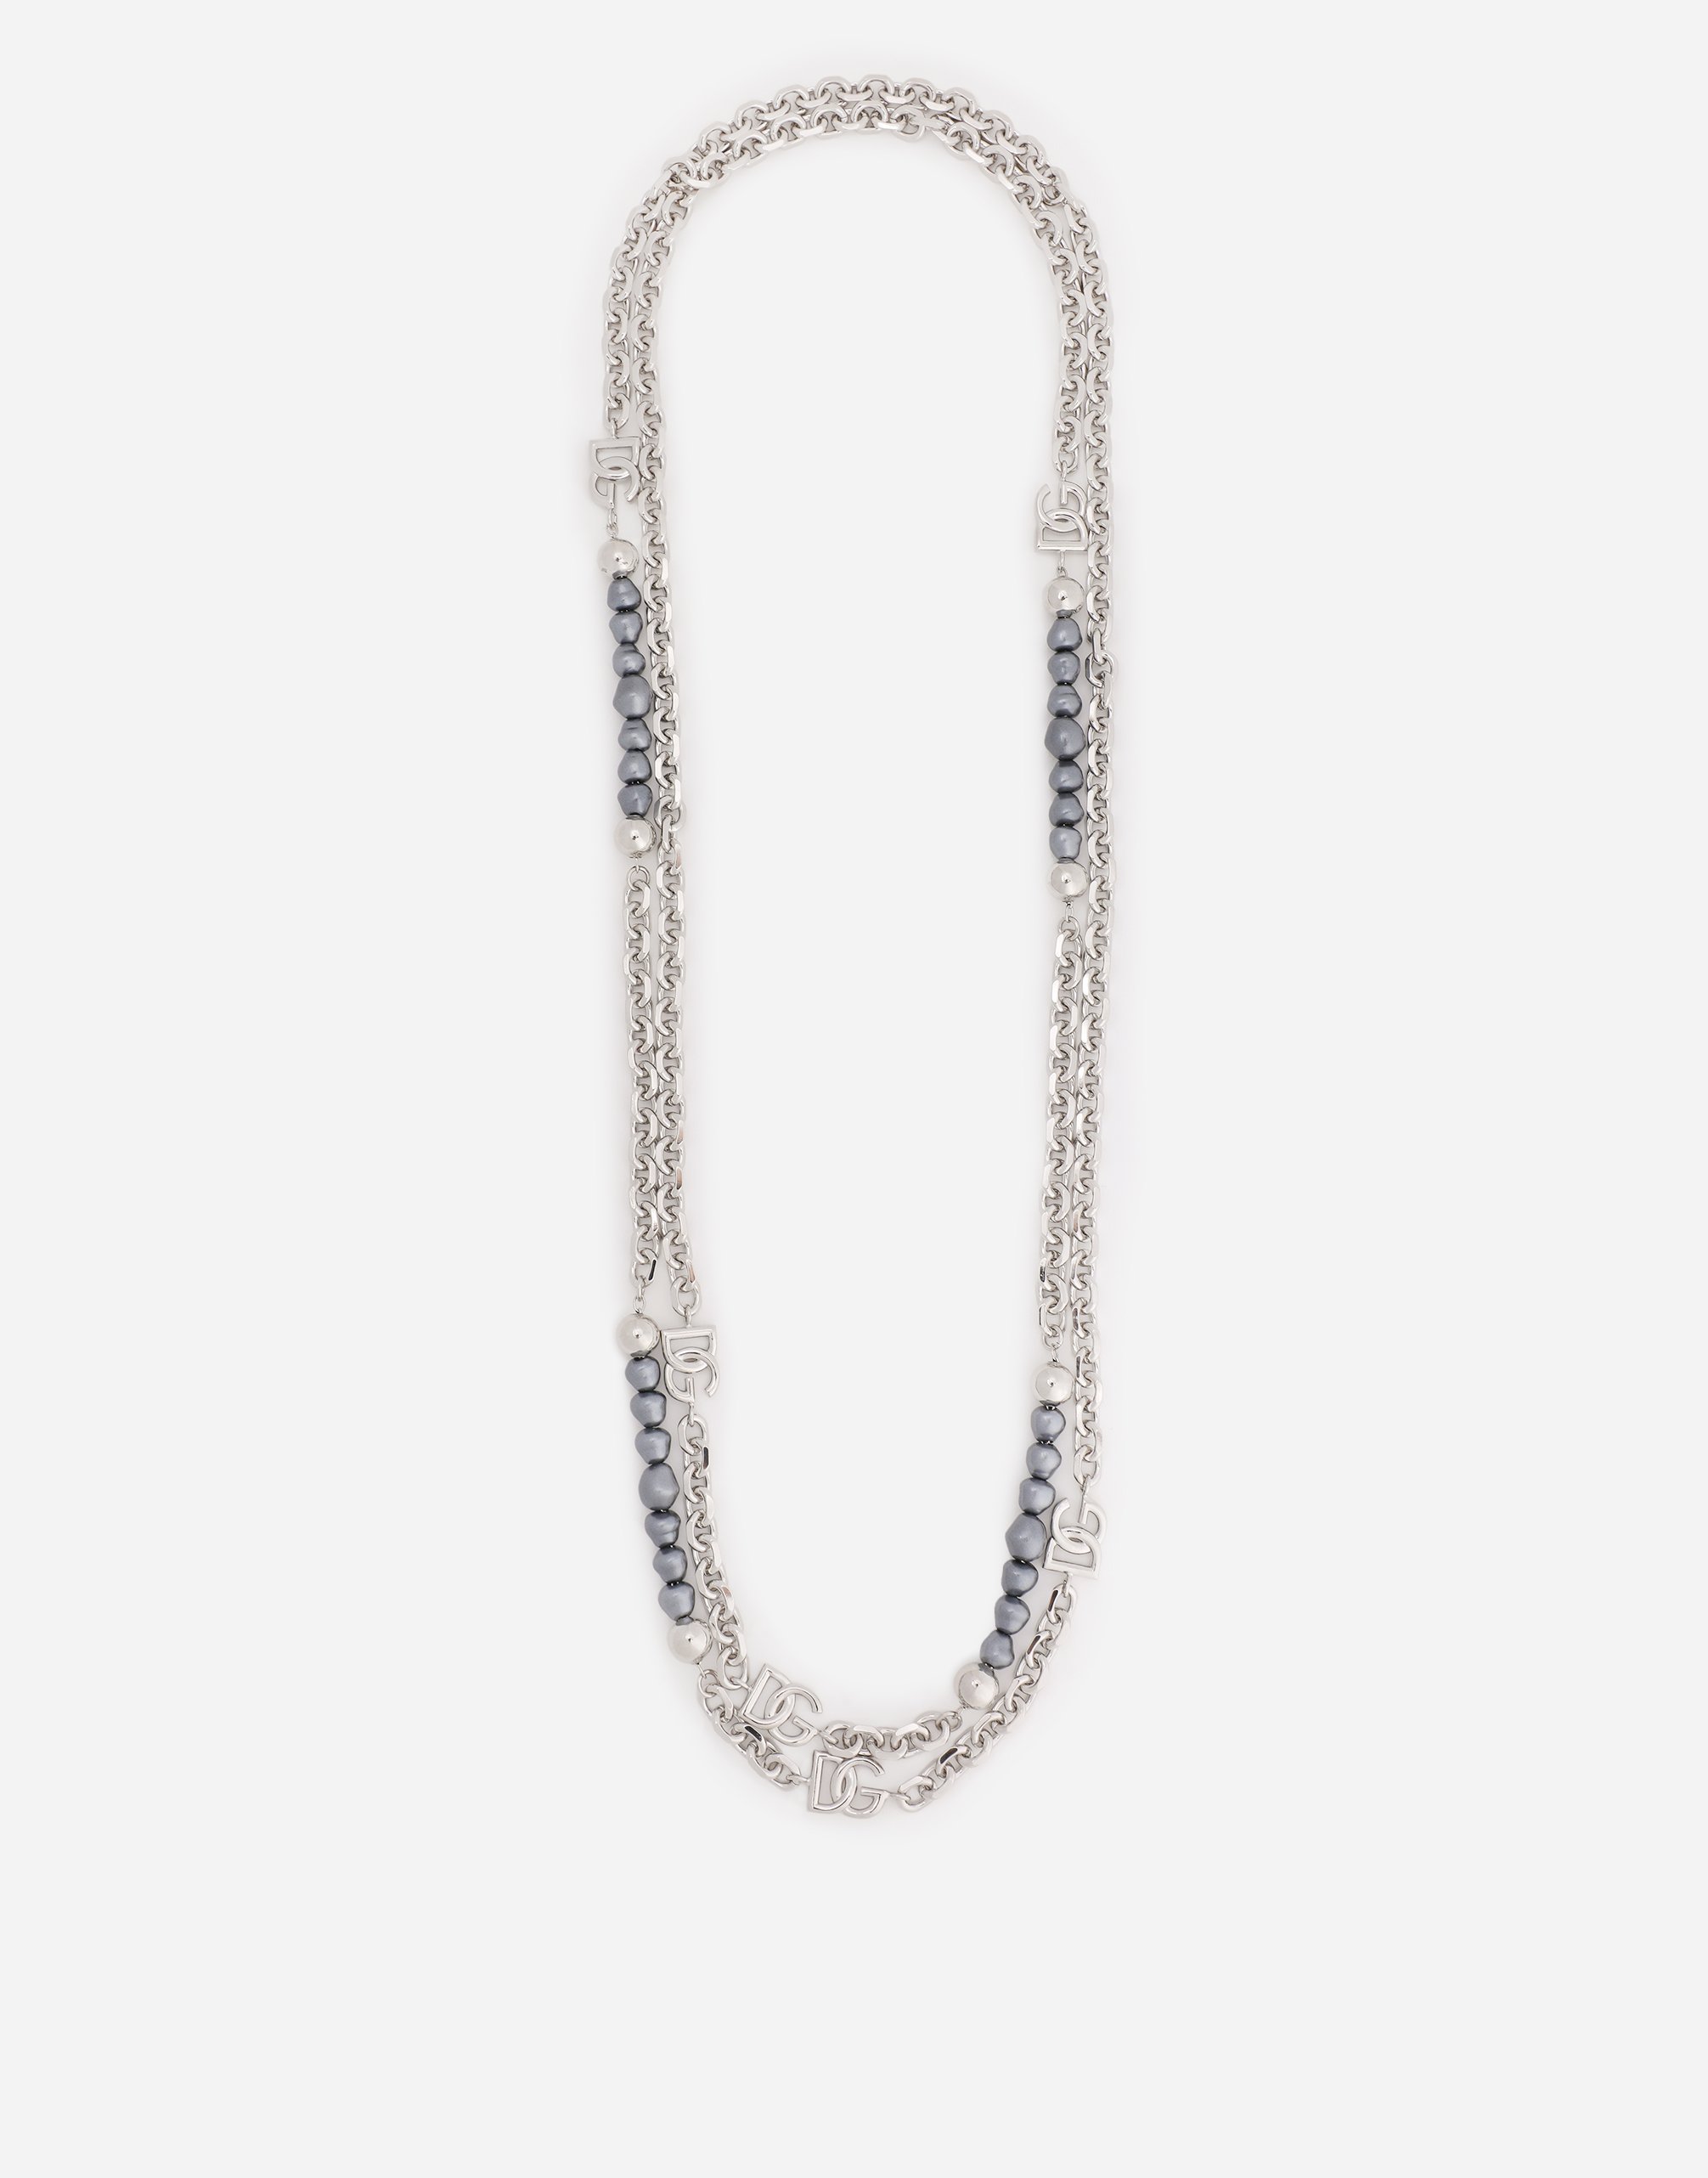 Multi-logo necklace with pearls in Silver